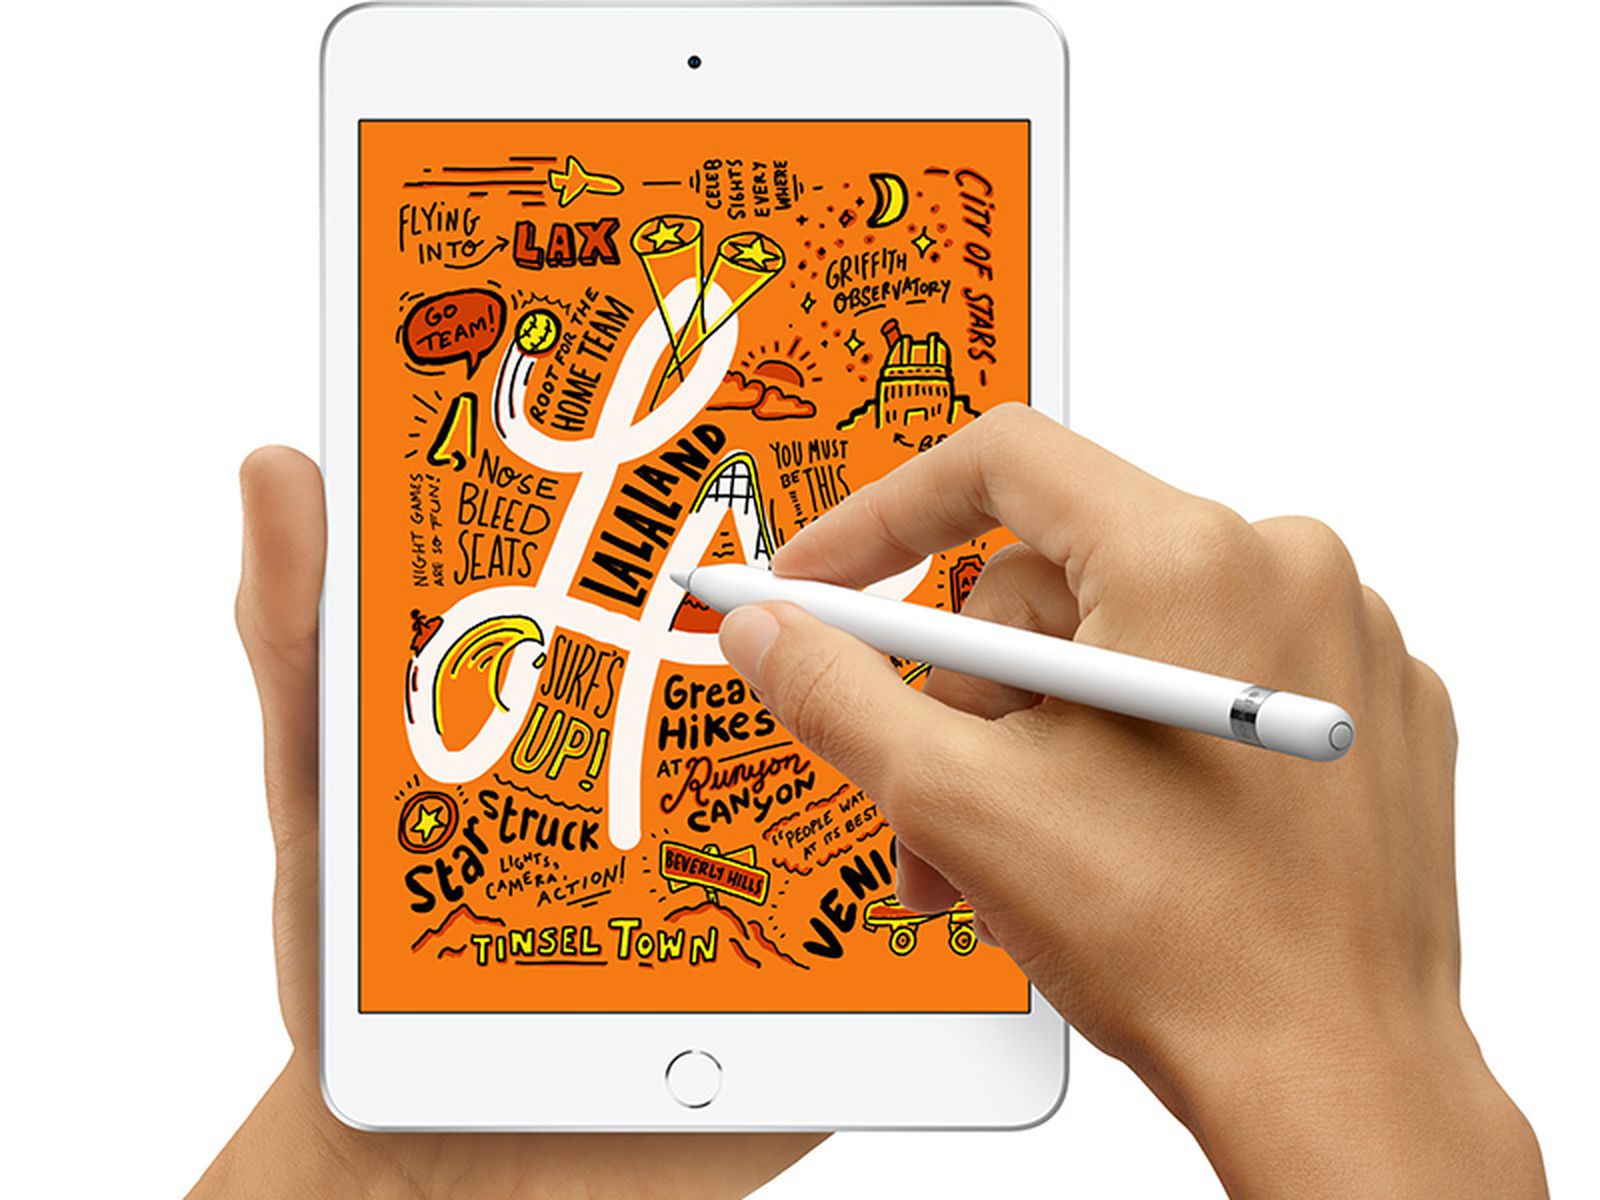 How to connect a stylus pen to iPad